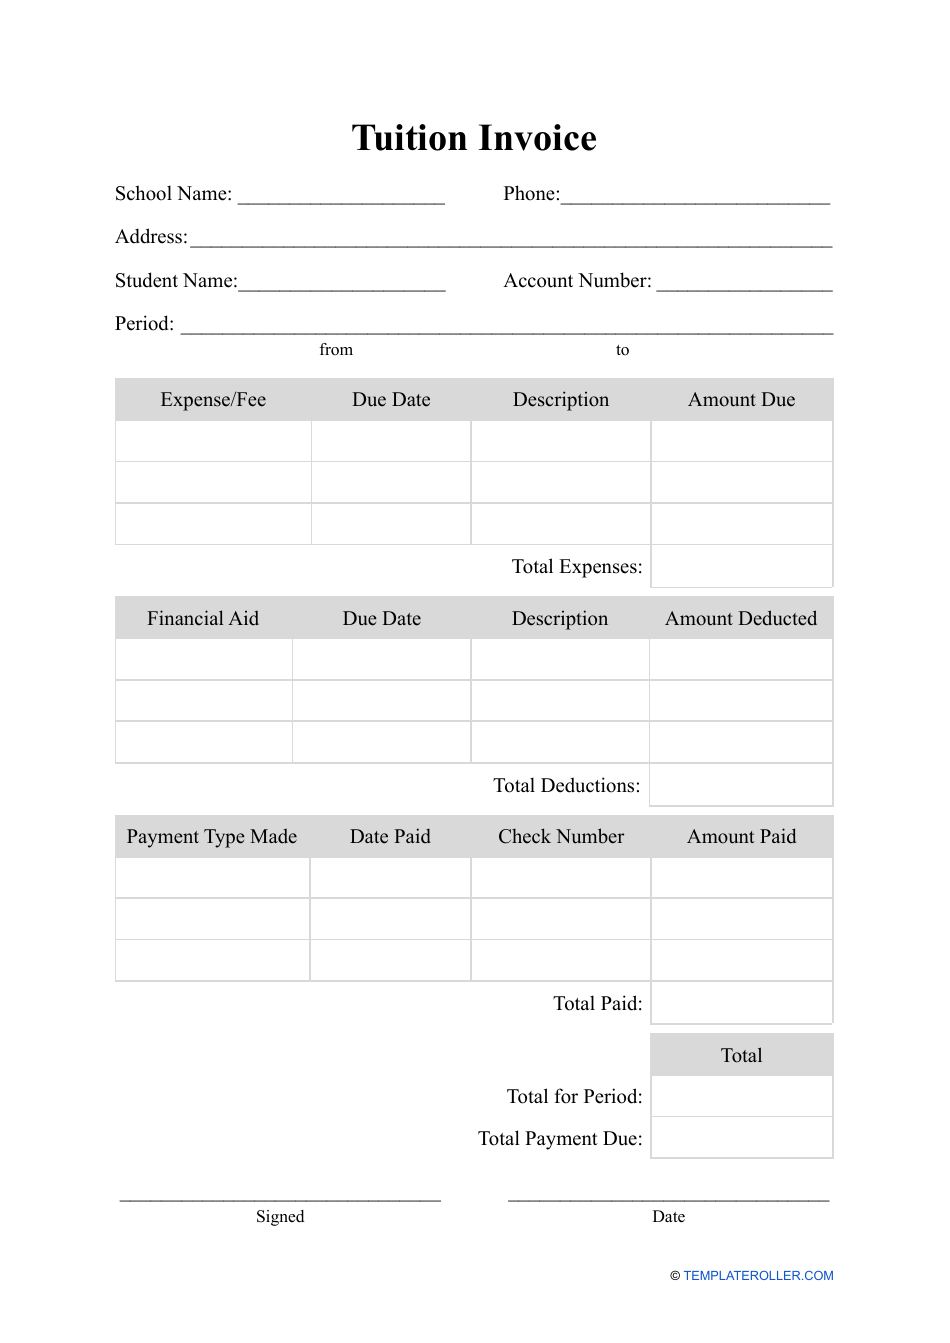 Tuition Invoice Template, Page 1